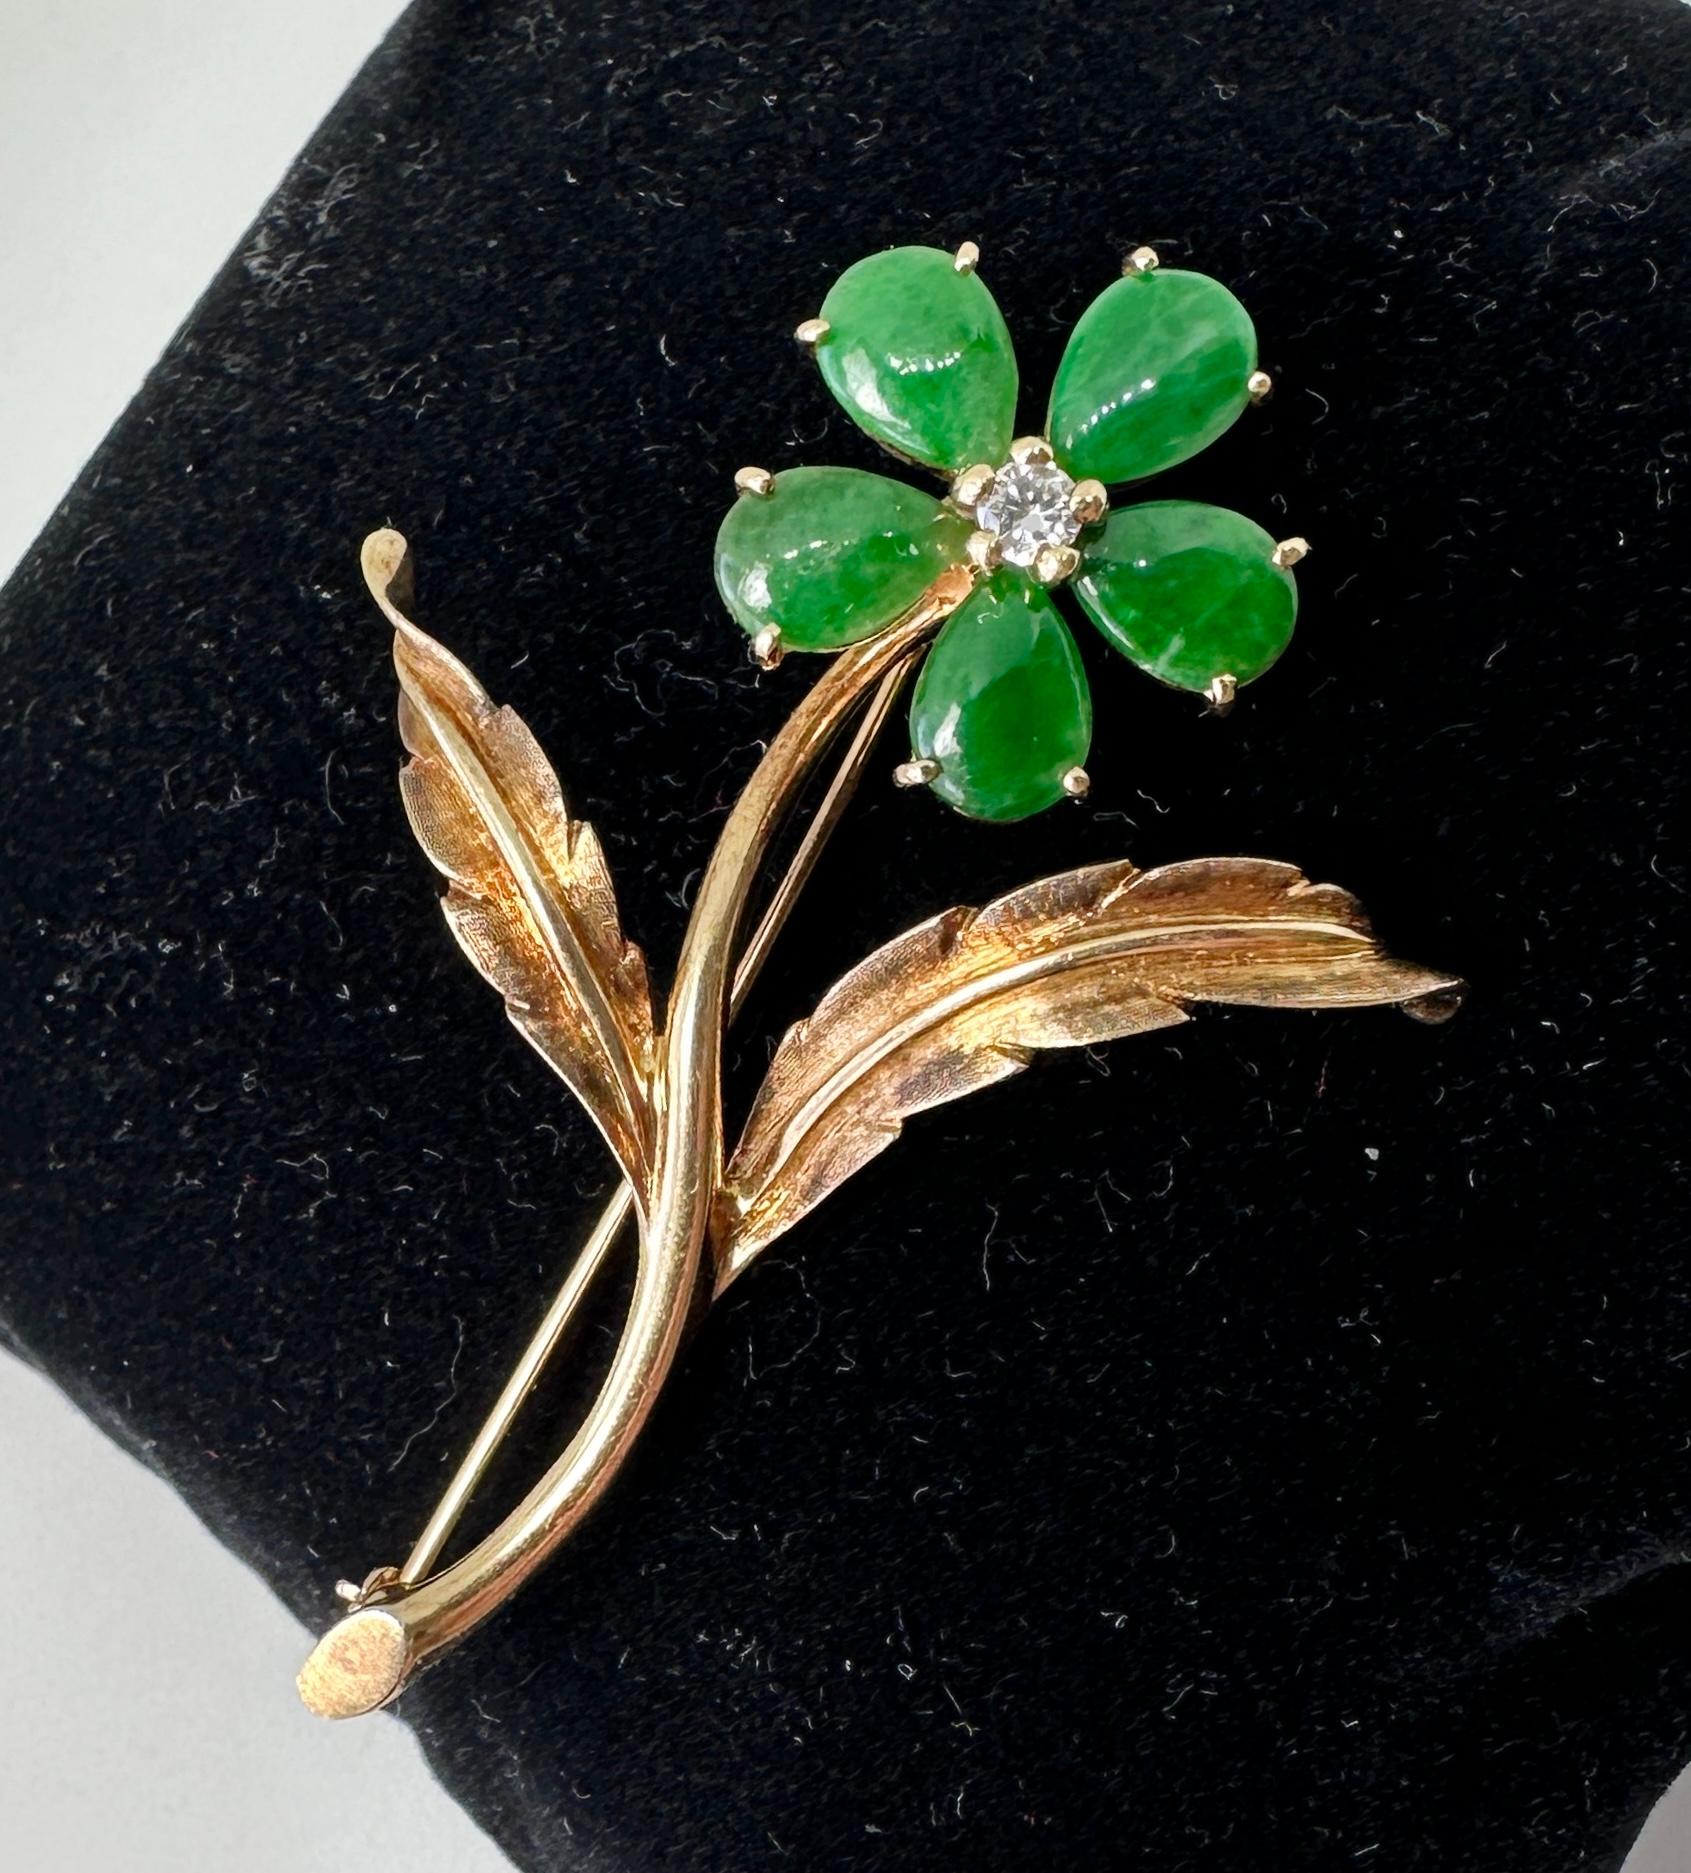 This is a gorgeous and rare antique Cartier Jade and Diamond Flower Brooch Pin in 14 Karat Gold.  The stunning jewel is an Antique brooch by Cartier dating to the Mid-Century Modern period.  Cartier and Jade have been a special pairing since the Art